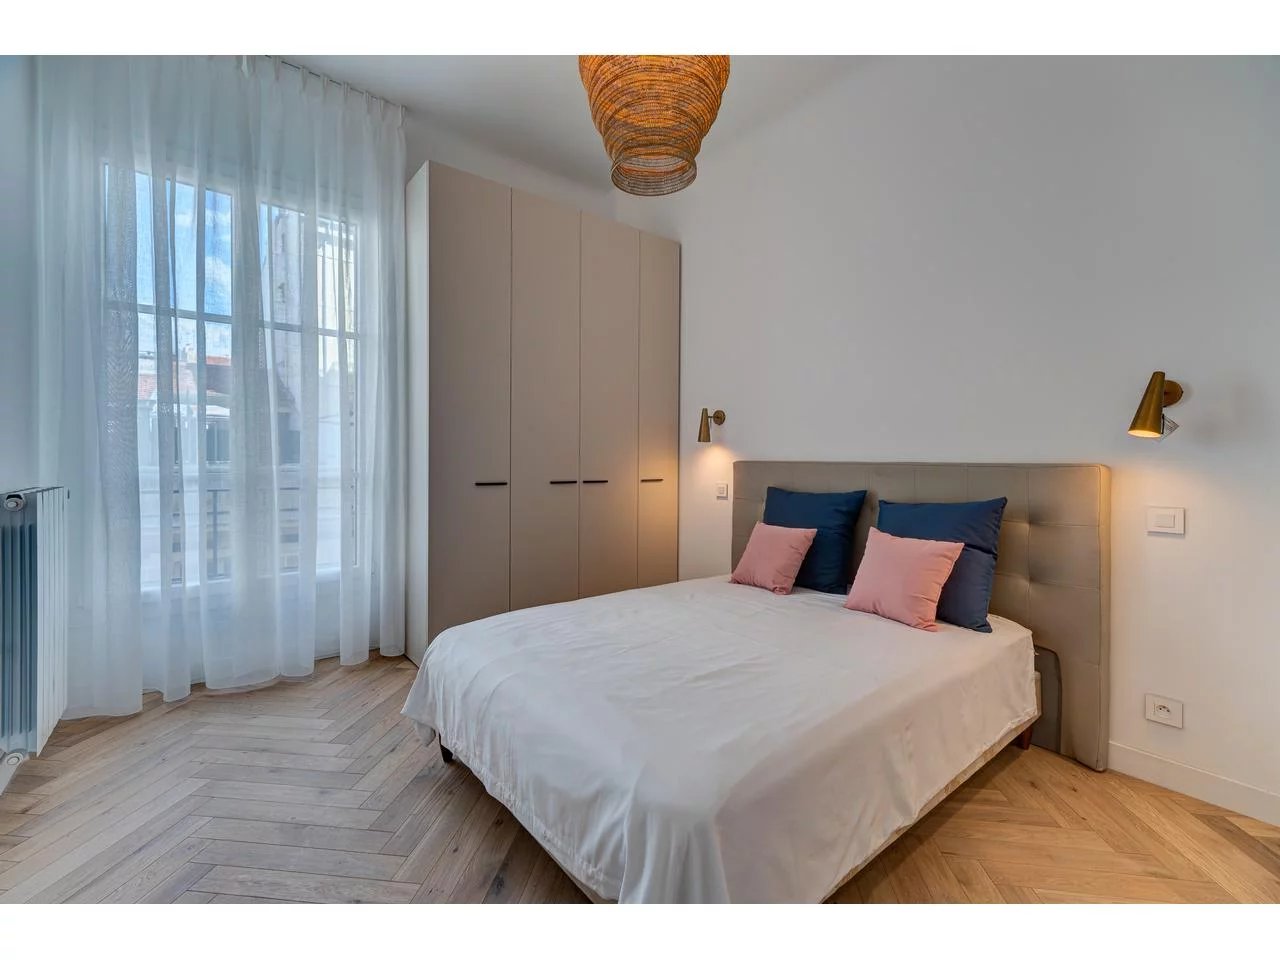 Appartement  3 Rooms 71m2  for sale   725 000 €